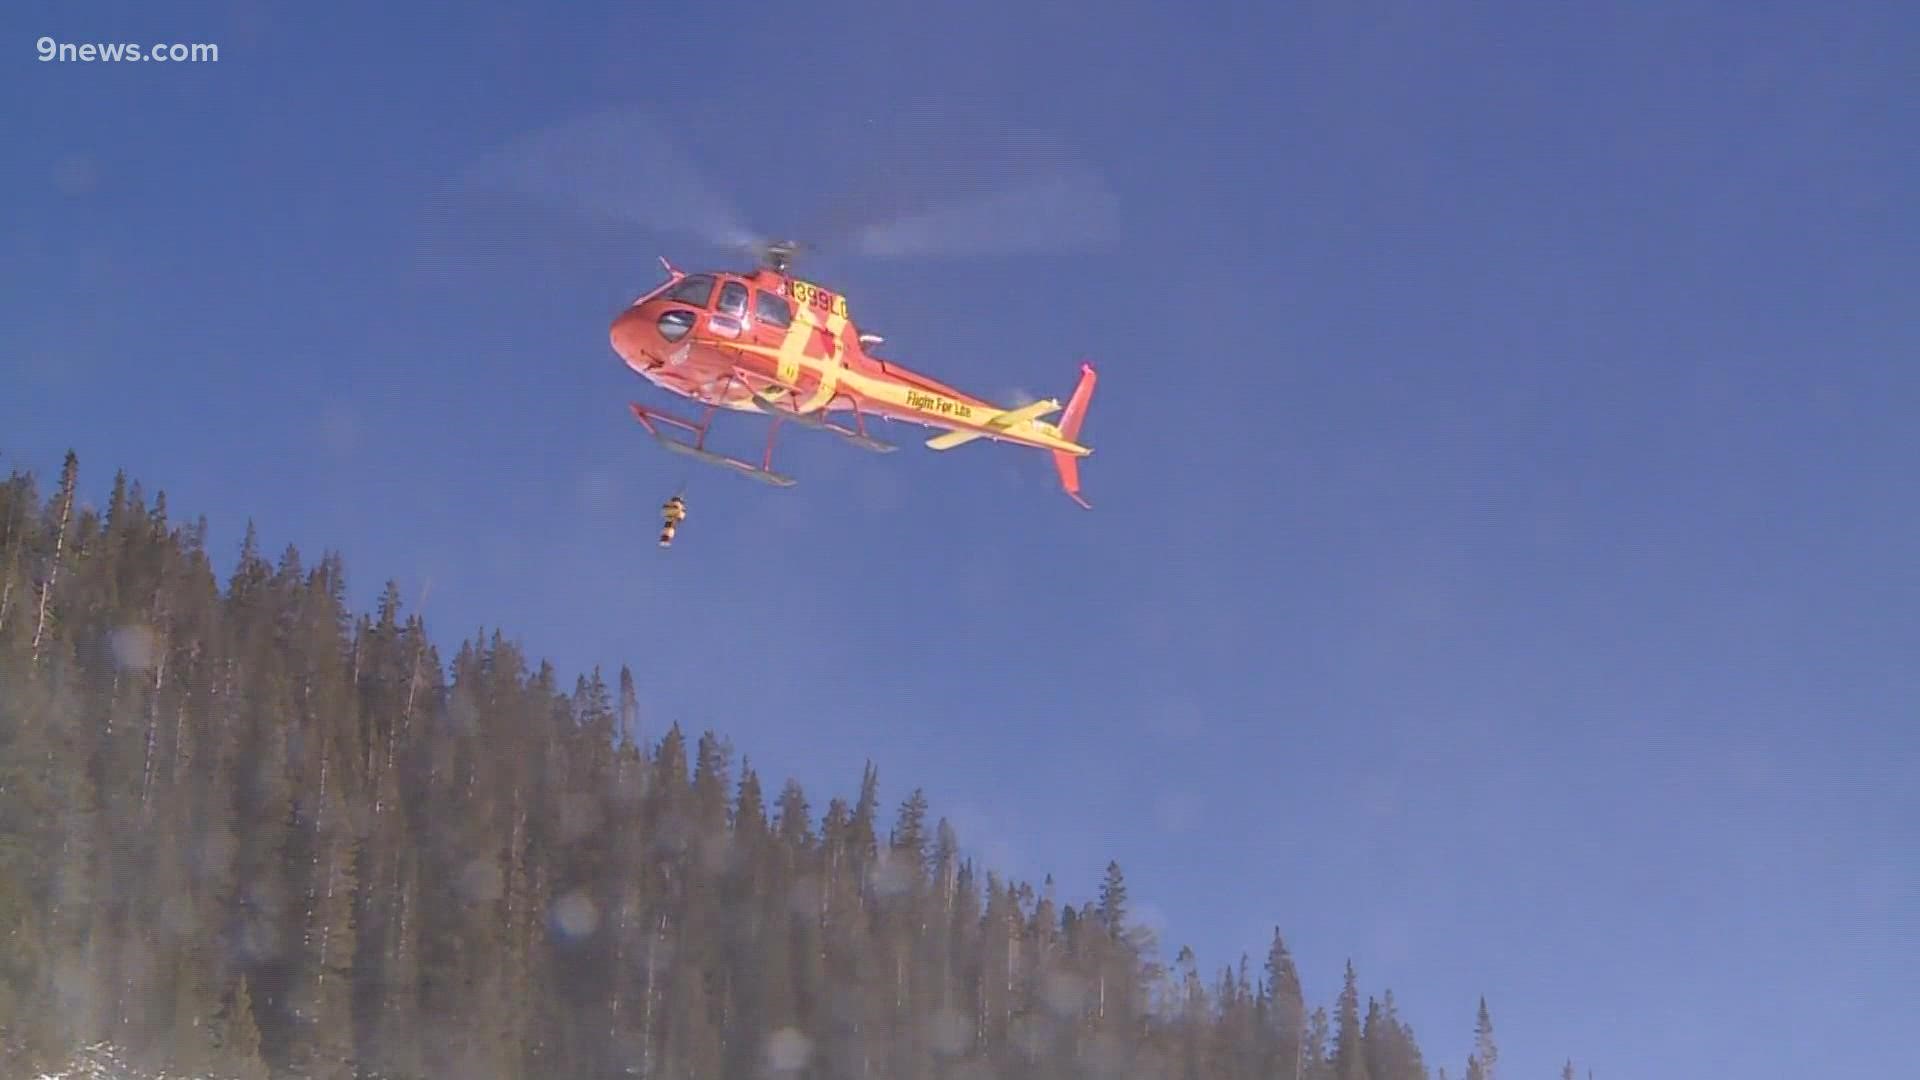 Some rescue helicopters are now equipped with beacons that detect avalanche transceivers, helping crews find where victims are buried.